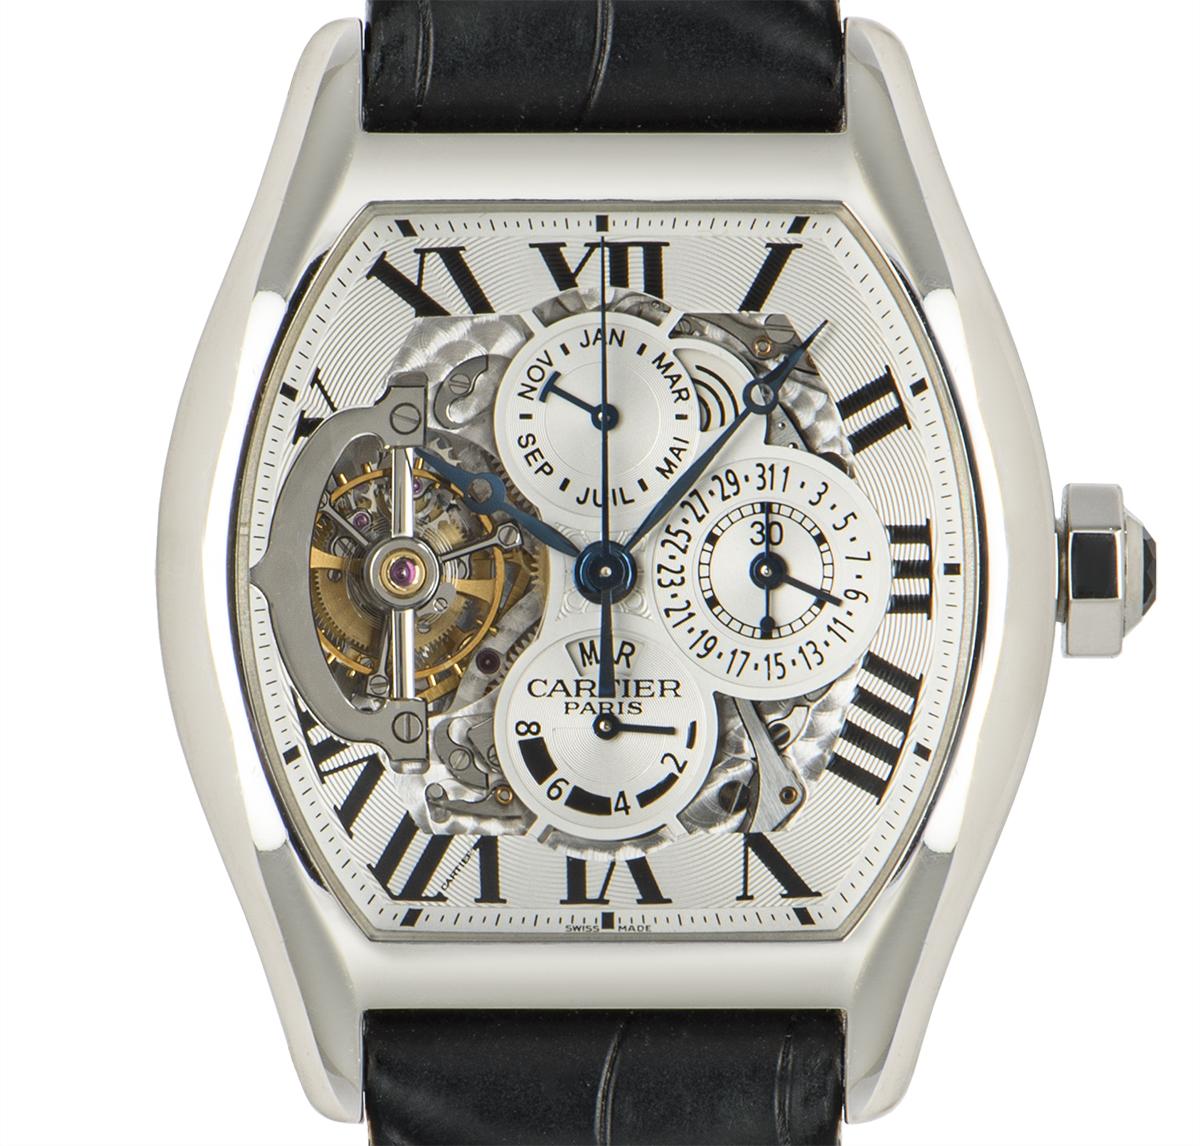 A Platinum Limited Edition Privée Tortue Tourbillon Perpetual Calendar Gents Wristwatch, silver guilloche dial with roman numerals and a secret signature at V of VII, blued steel Breguet style hands, leap year aperture at 1 0'clock, date sub-dial